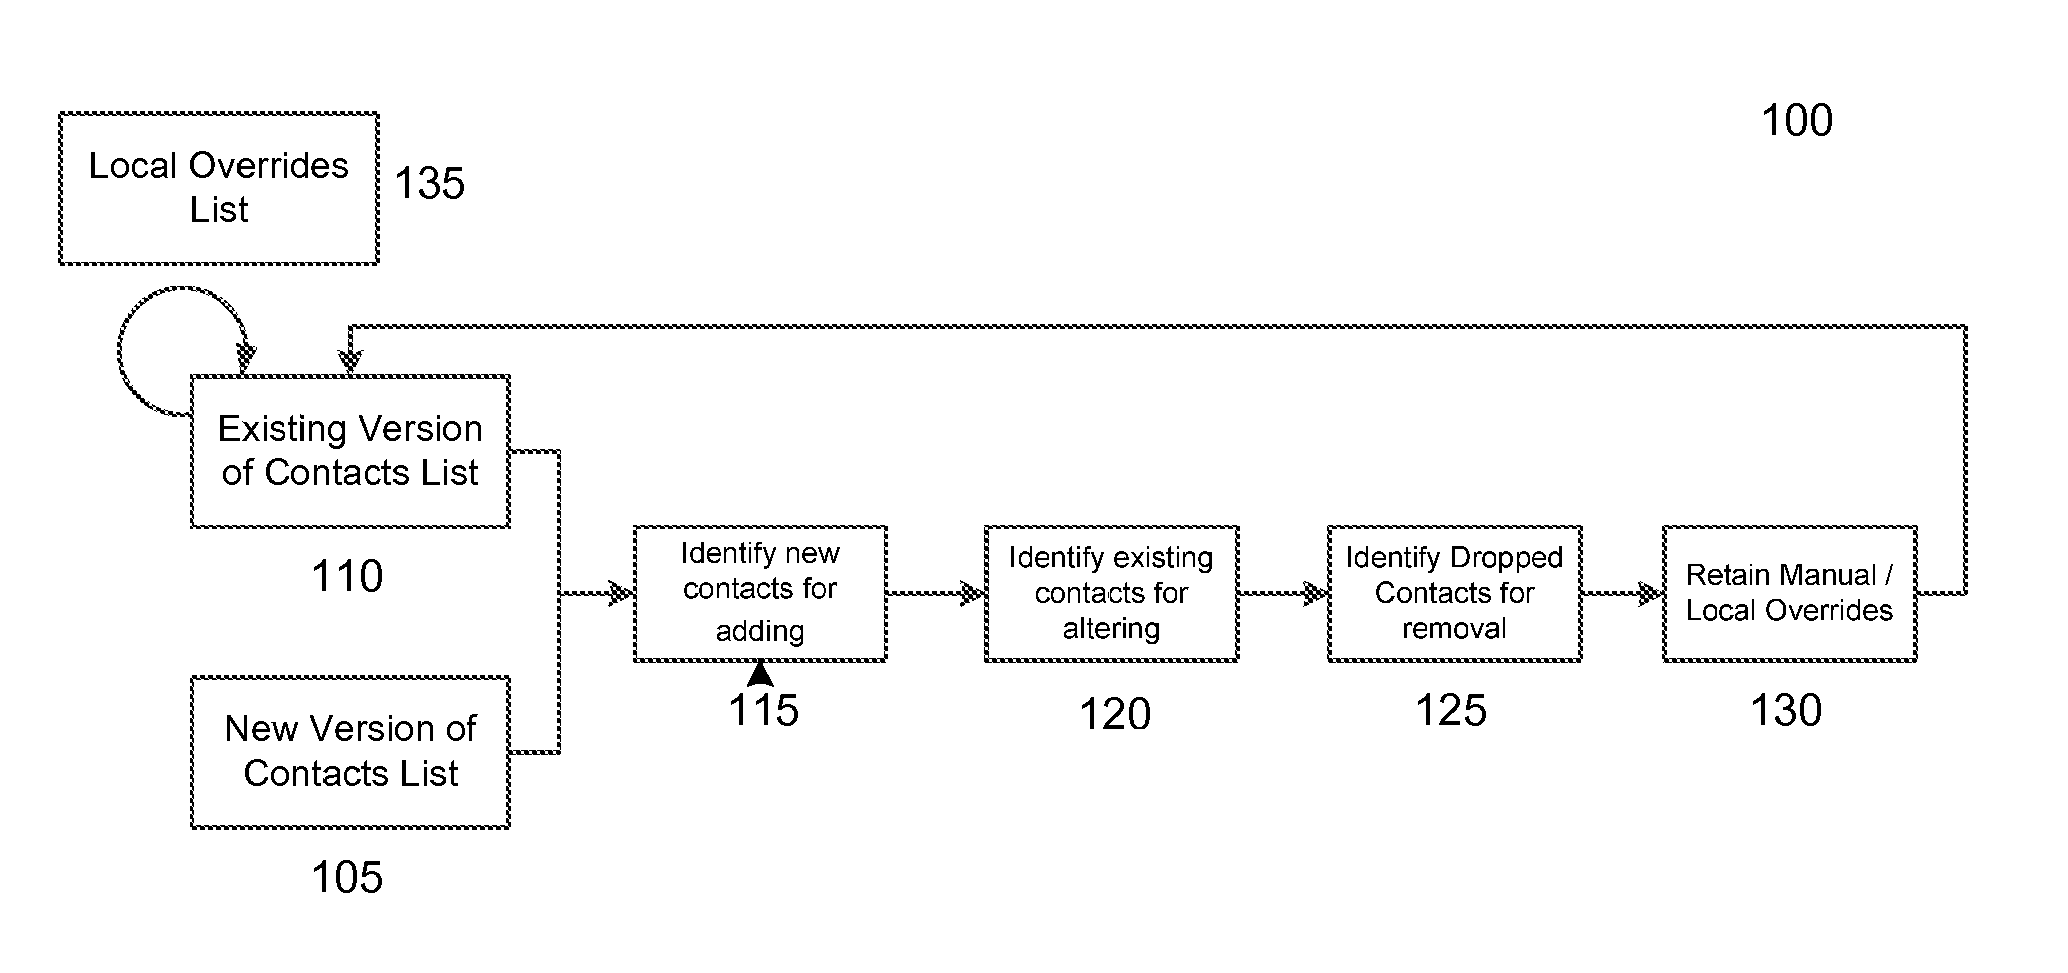 System and Method for Automatically Importing, Refreshing, Maintaining, and Merging Contact Sets